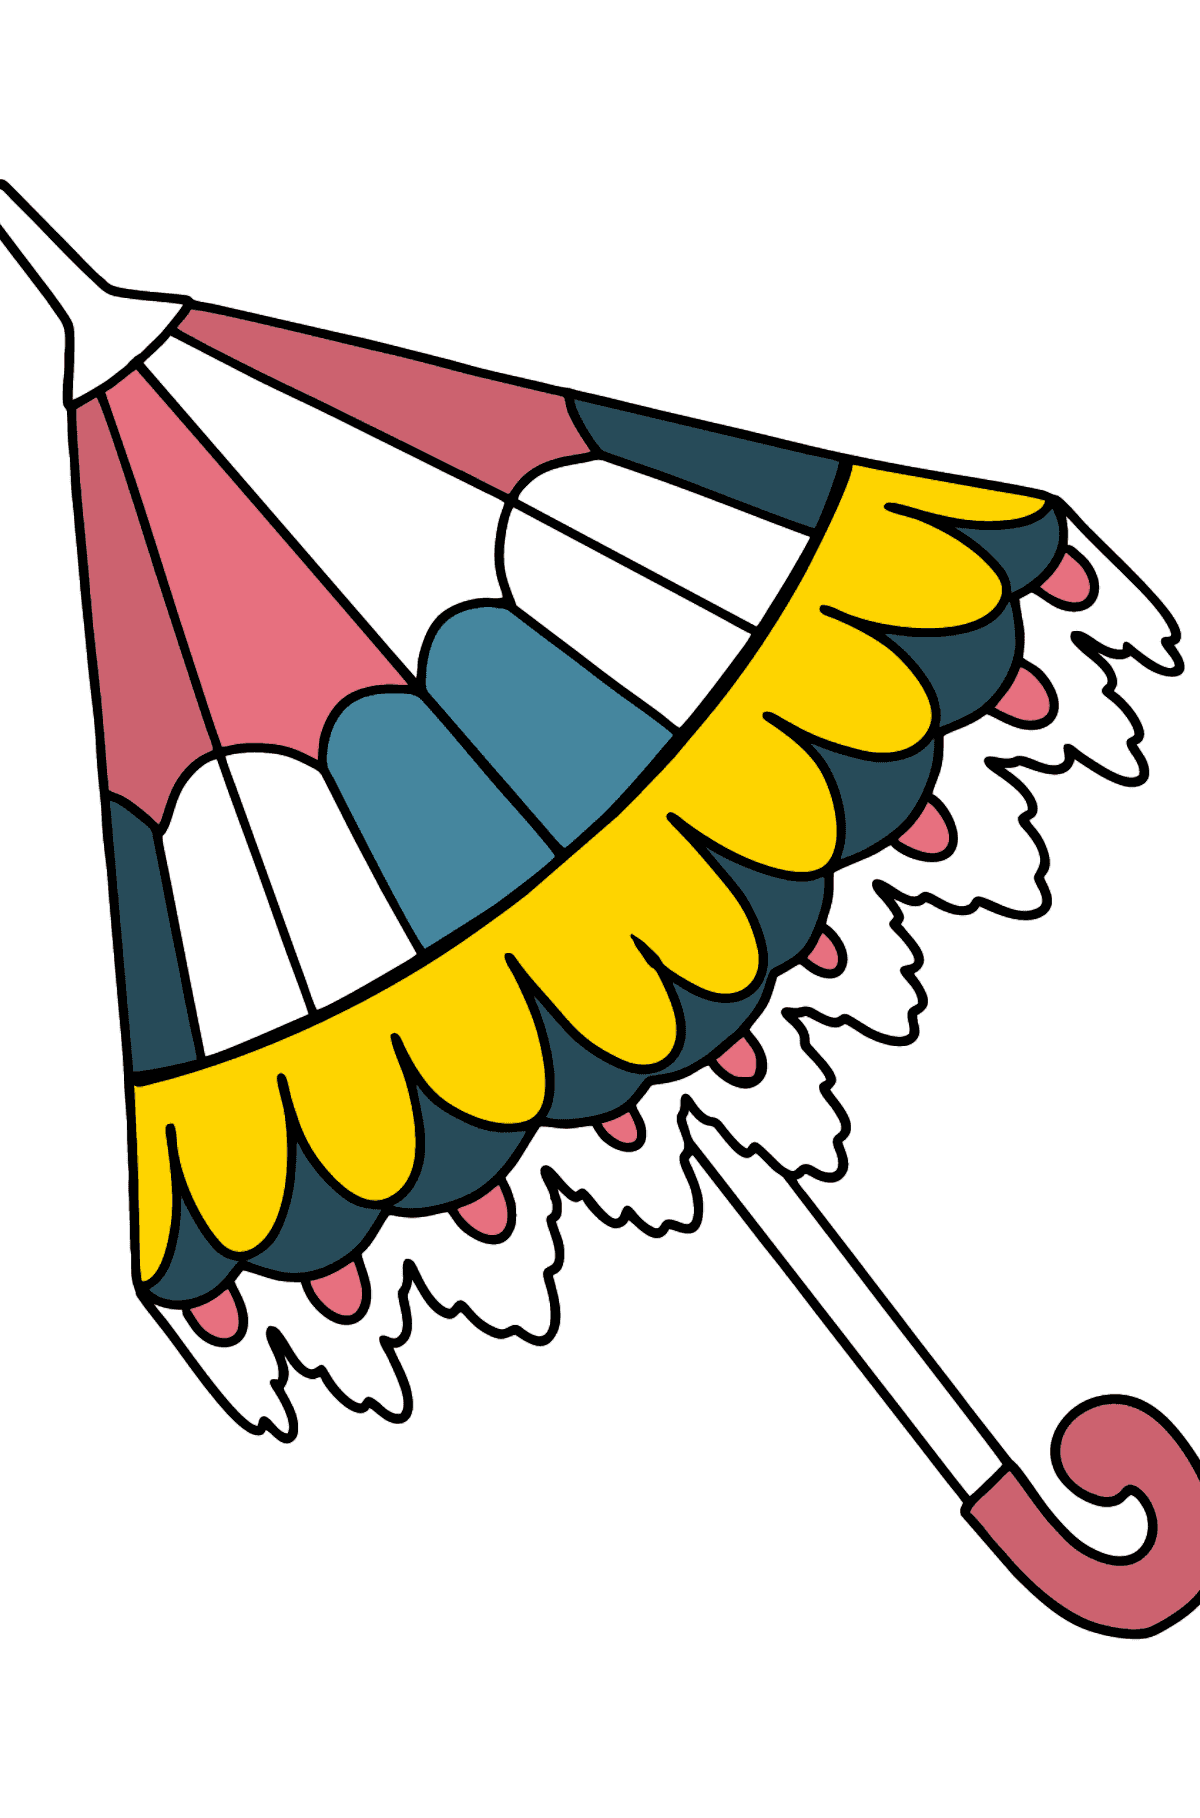 Coloring page with umbrella - Coloring Pages for Kids